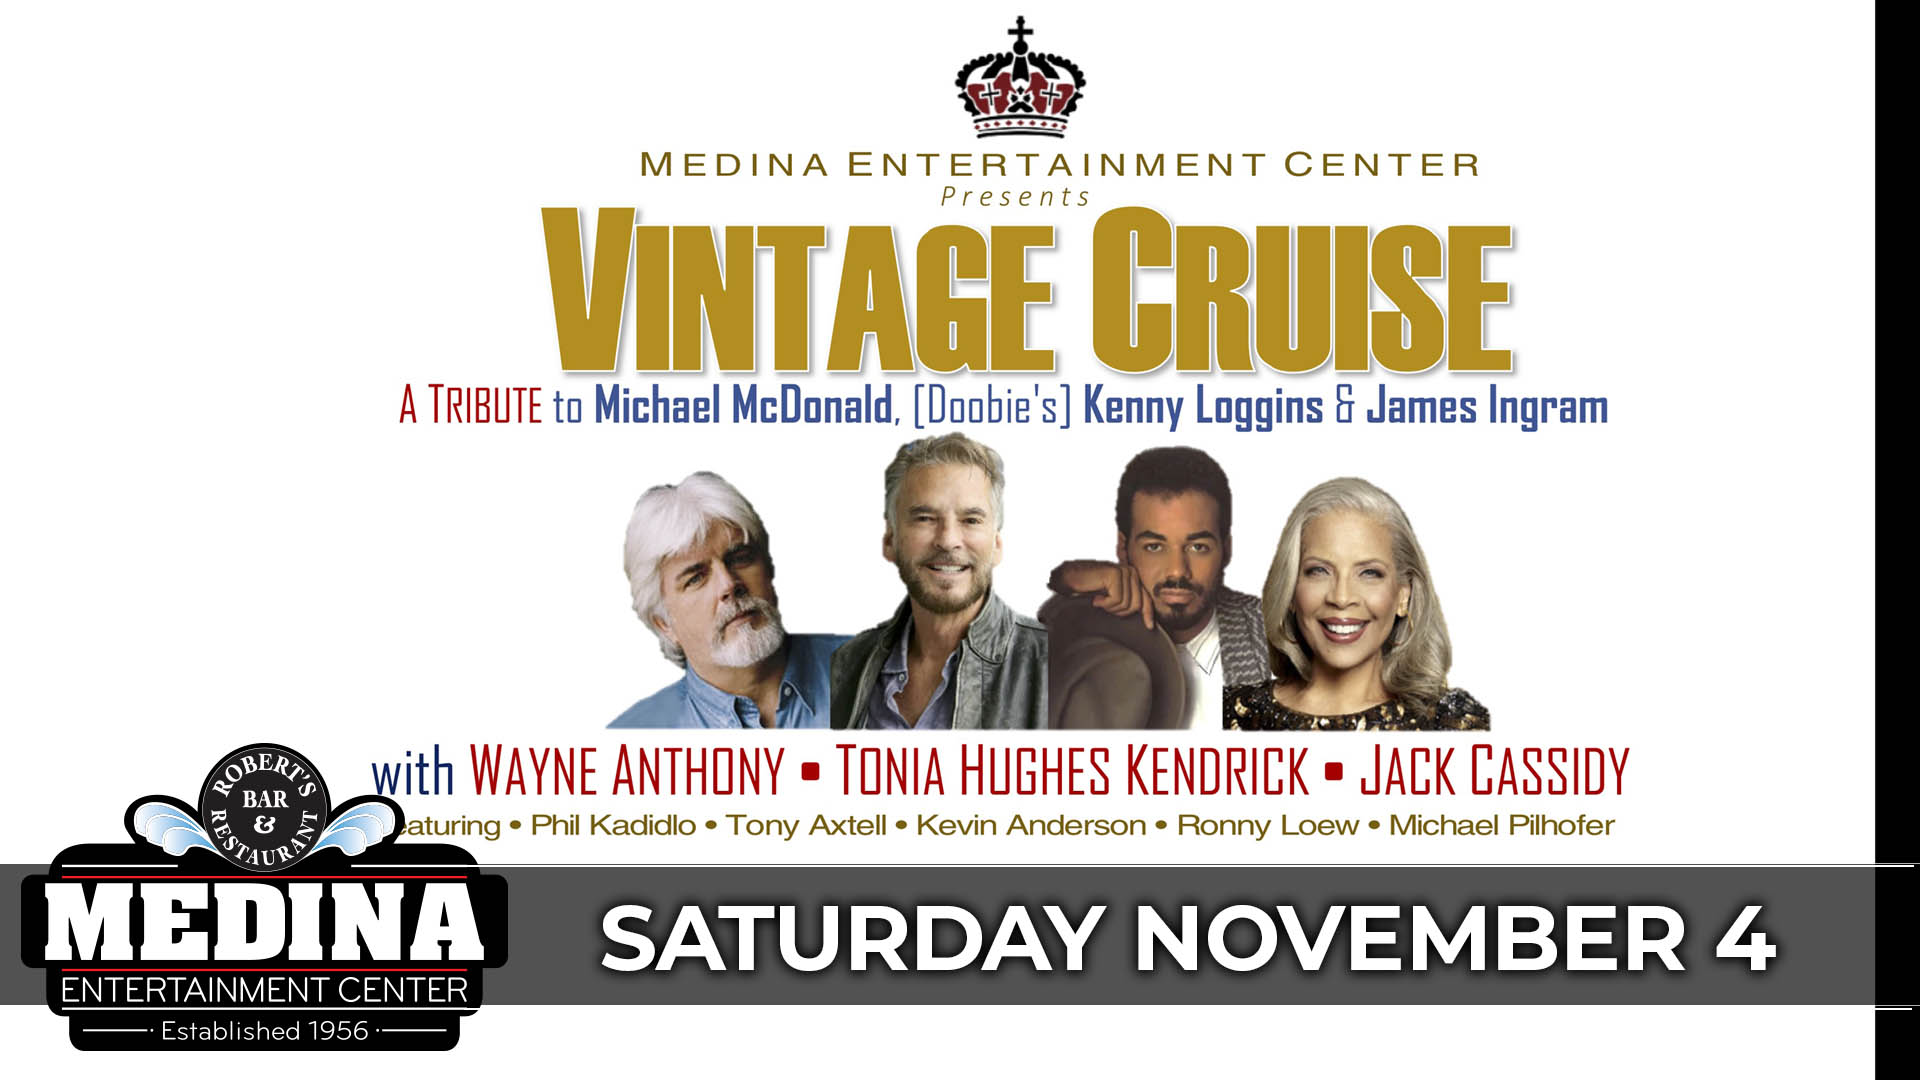 VINTAGE CRUISE The Music of Michael McDonald, Kenny Loggins, & James Ingram with WAYNE ANTHONY • TONIA HUGHES KENDRICK • JACK CASSIDY THE RHYTHM SECTION Phil Kadidlo – Keyboards & Vocals • Tony Axtell Bass & Vocals • Kevin Anderson – Guitar • Michael Pilhofer – Drums • Ronny Loew – Saxophone & Percussion Medina Entertainment Center Saturday, November 4, 2023 Doors: 7:00PM | Music: 8:00PM | 21+ Tickets on-sale Friday October 13 at 11am General Seating $28 / Silver Reserved $33 / Gold Reserved $38 - plus applicable fees